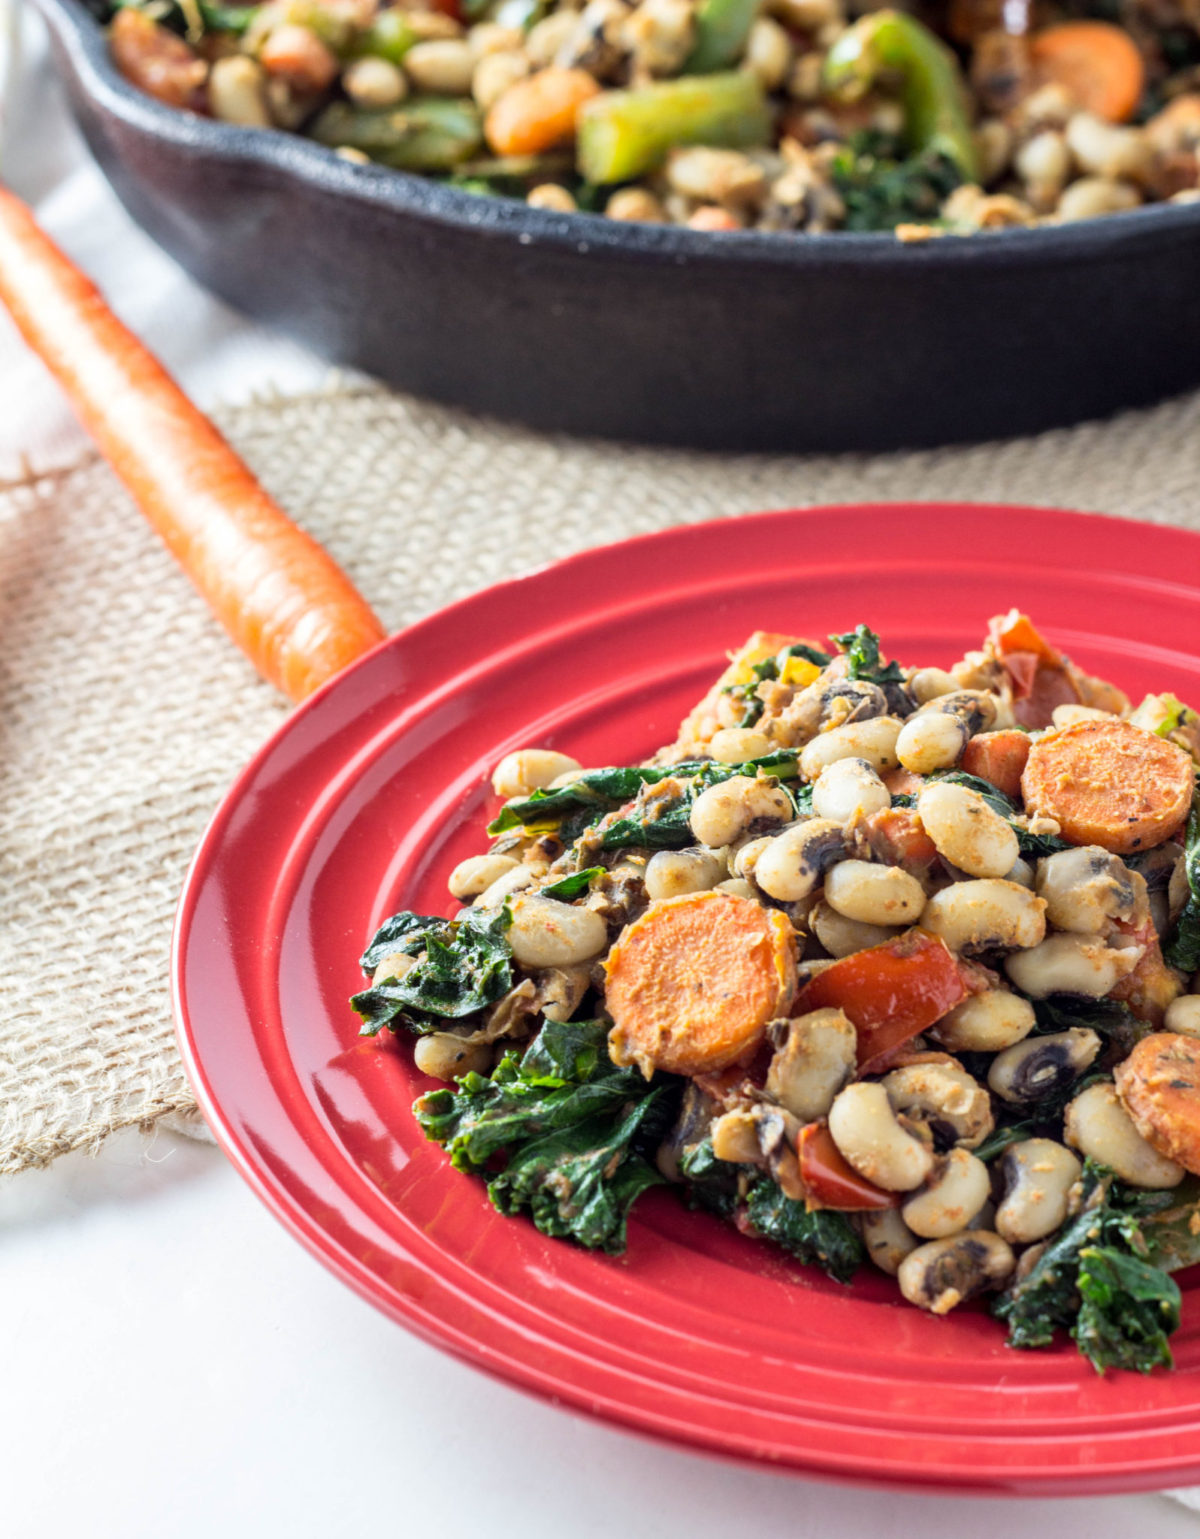 Black Eyed Pea Hash-This Black Eyed Pea Hash is quick and simple and made in one skillet with kale, carrots, and tomatoes. Perfect for New Year'sor anytime of year. Vegan, GF.